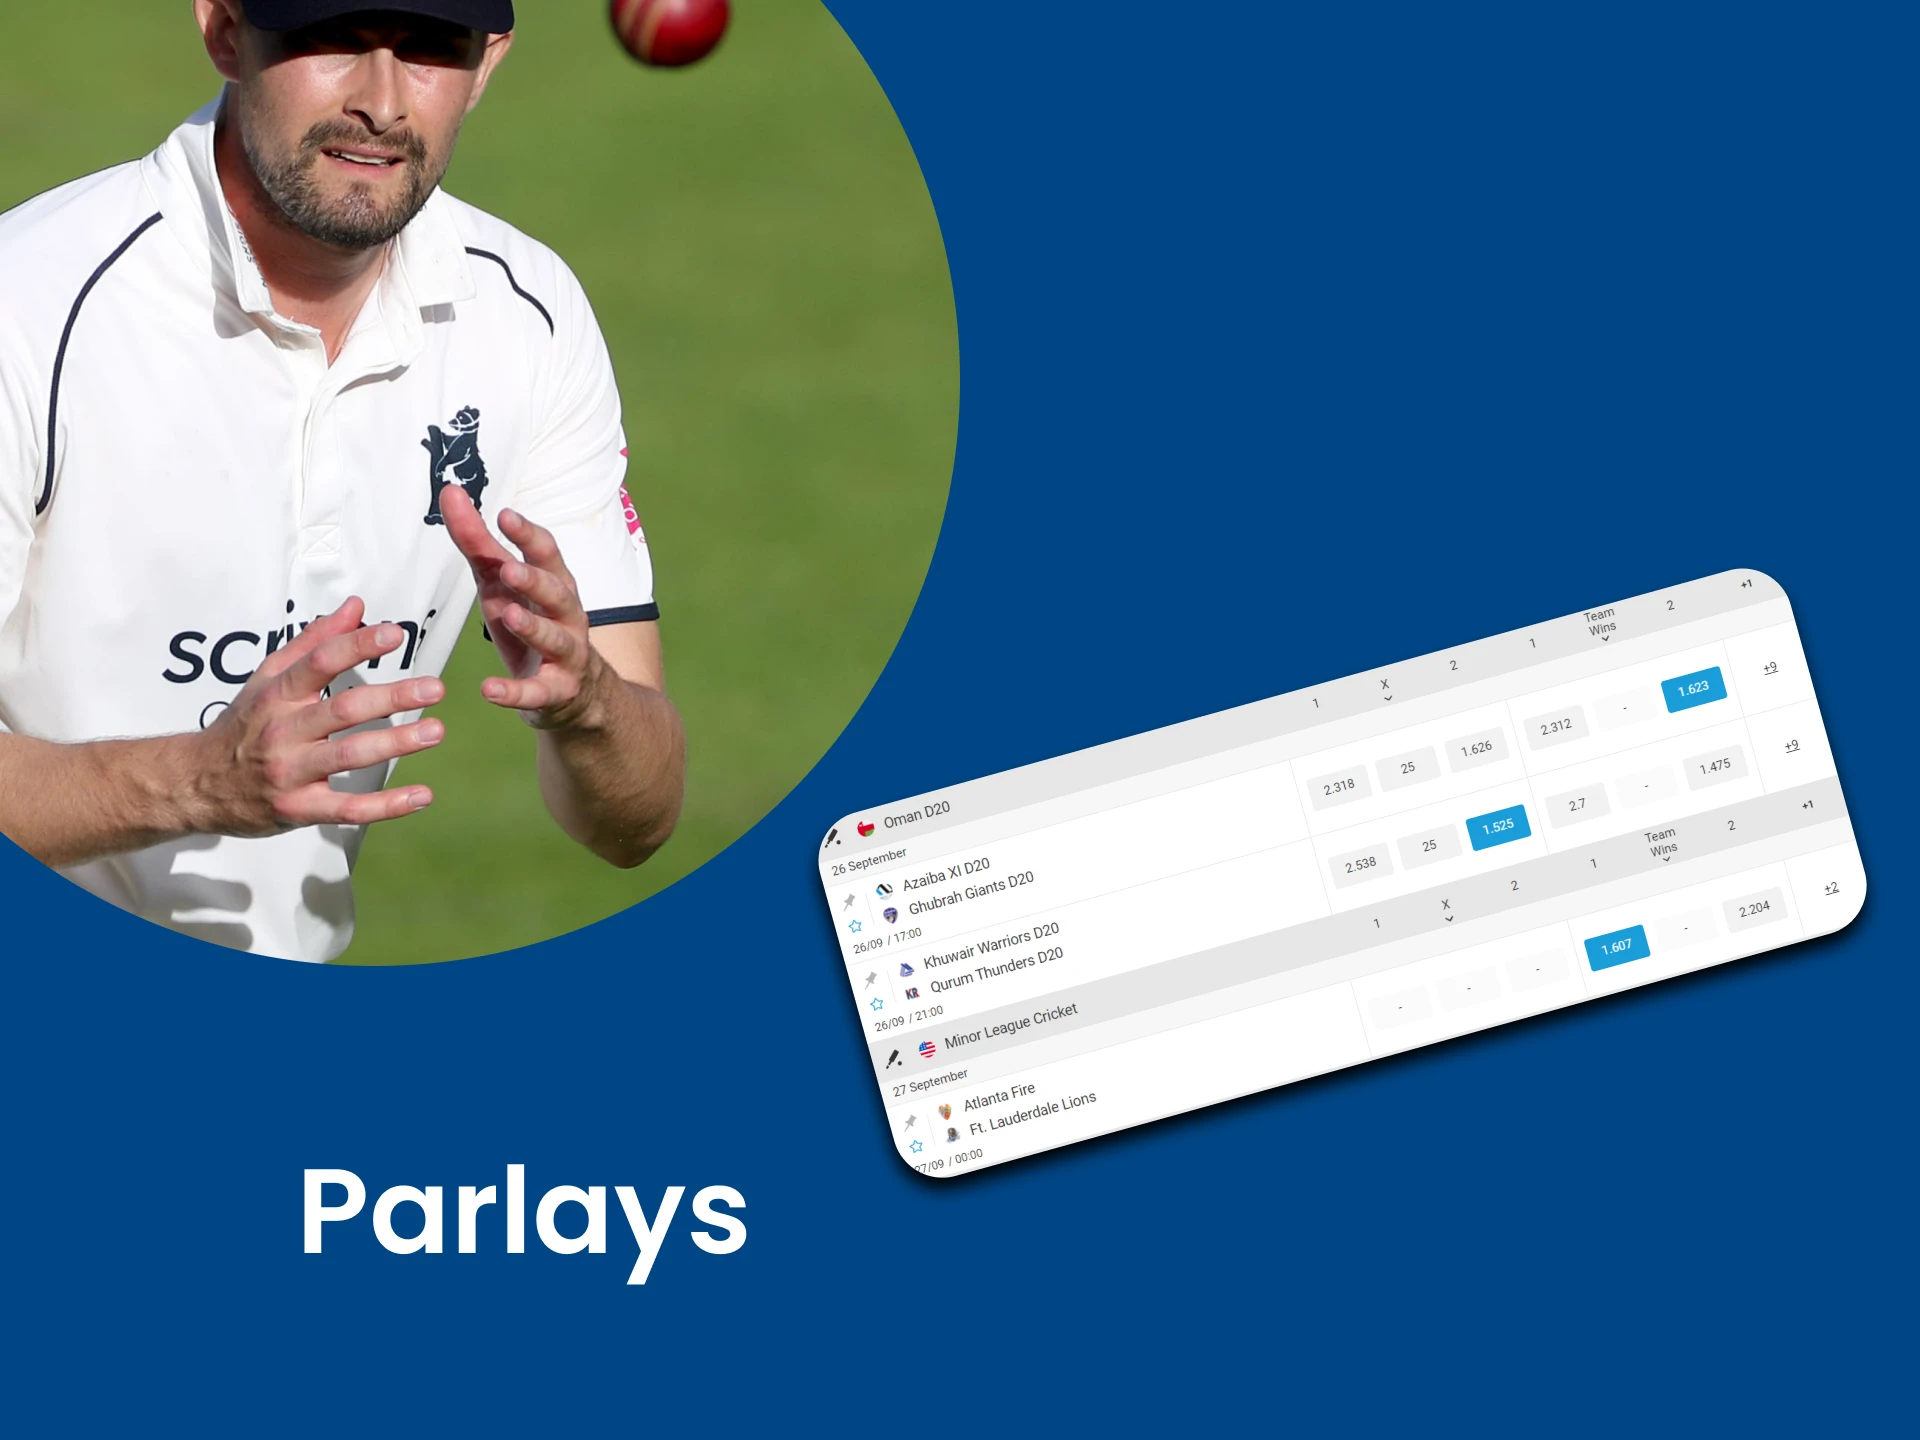 For sports betting, select "Parlays".